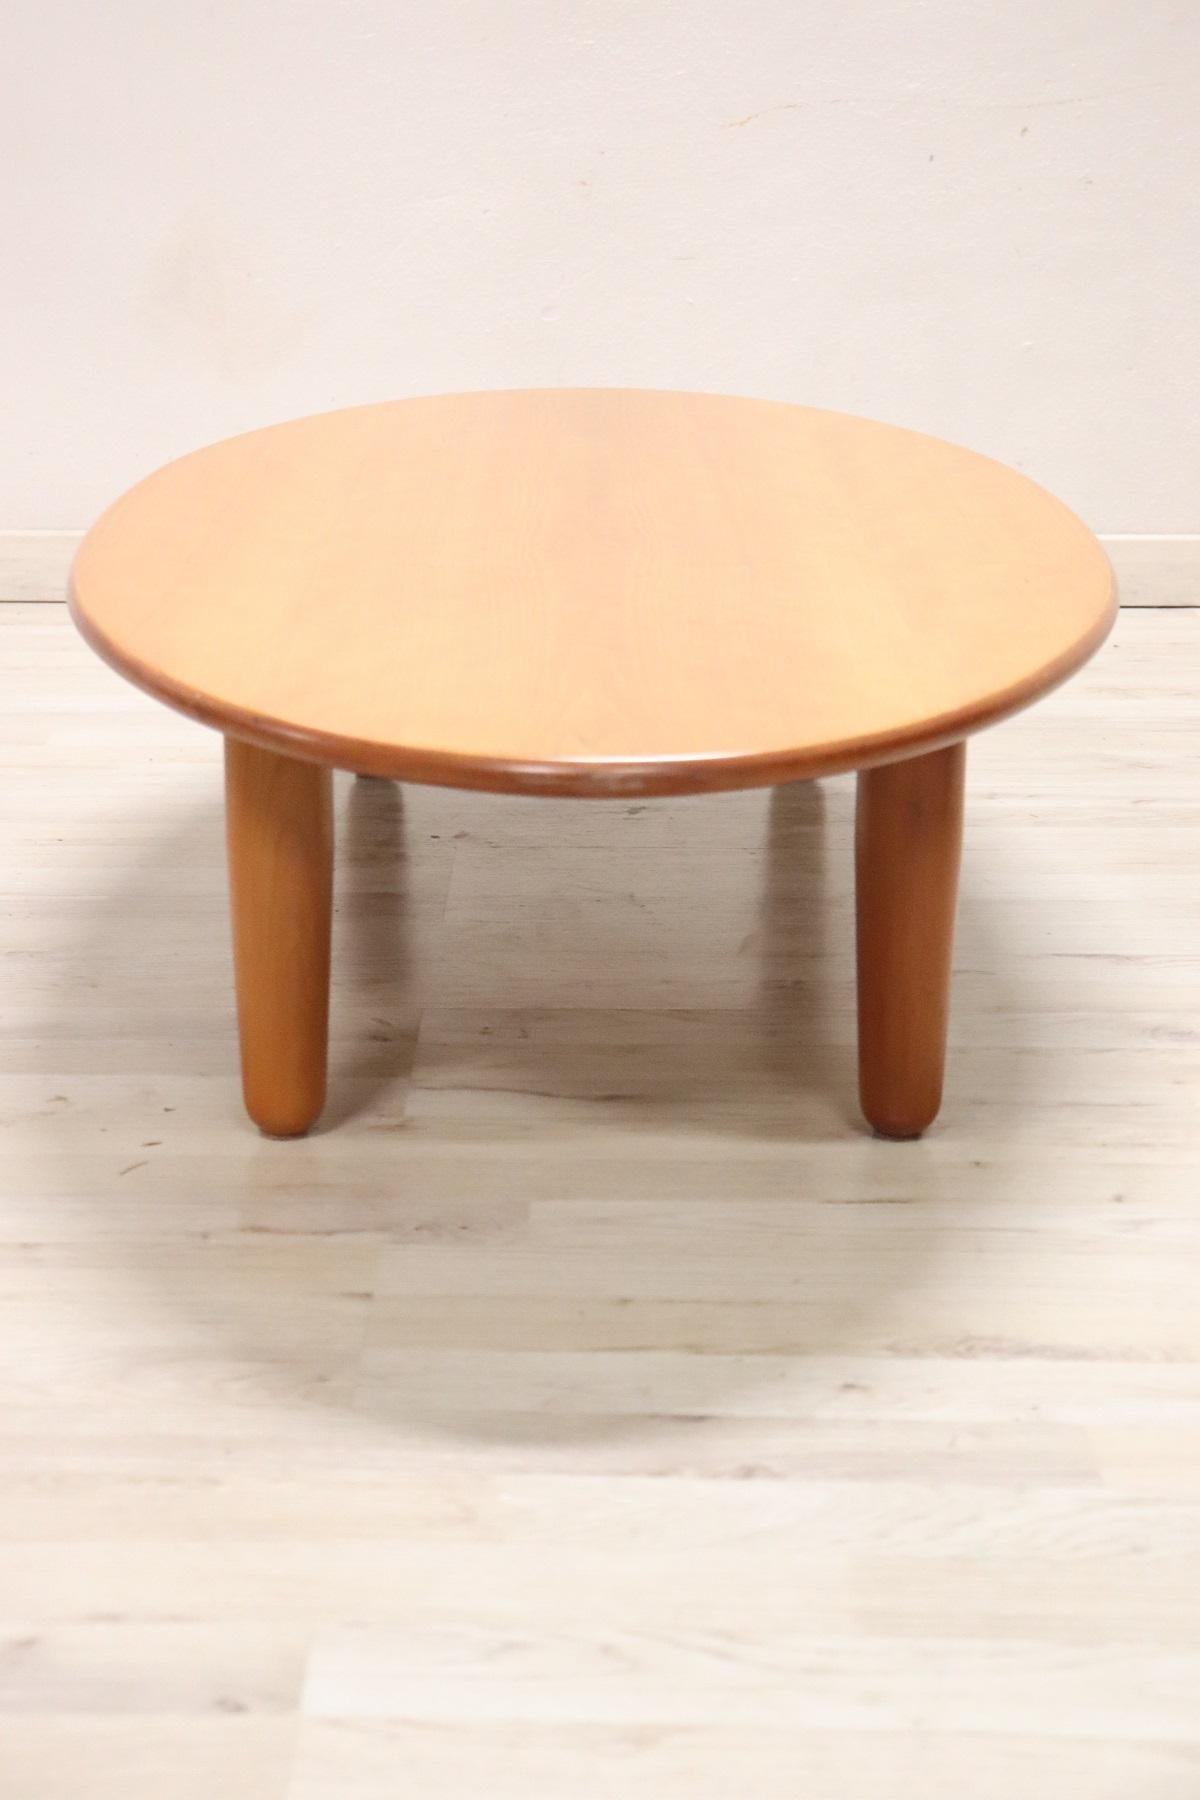 Late 20th Century Rare Italian Design Oval Large Sofa Table or Coffee Table by Cassina, 1980s For Sale